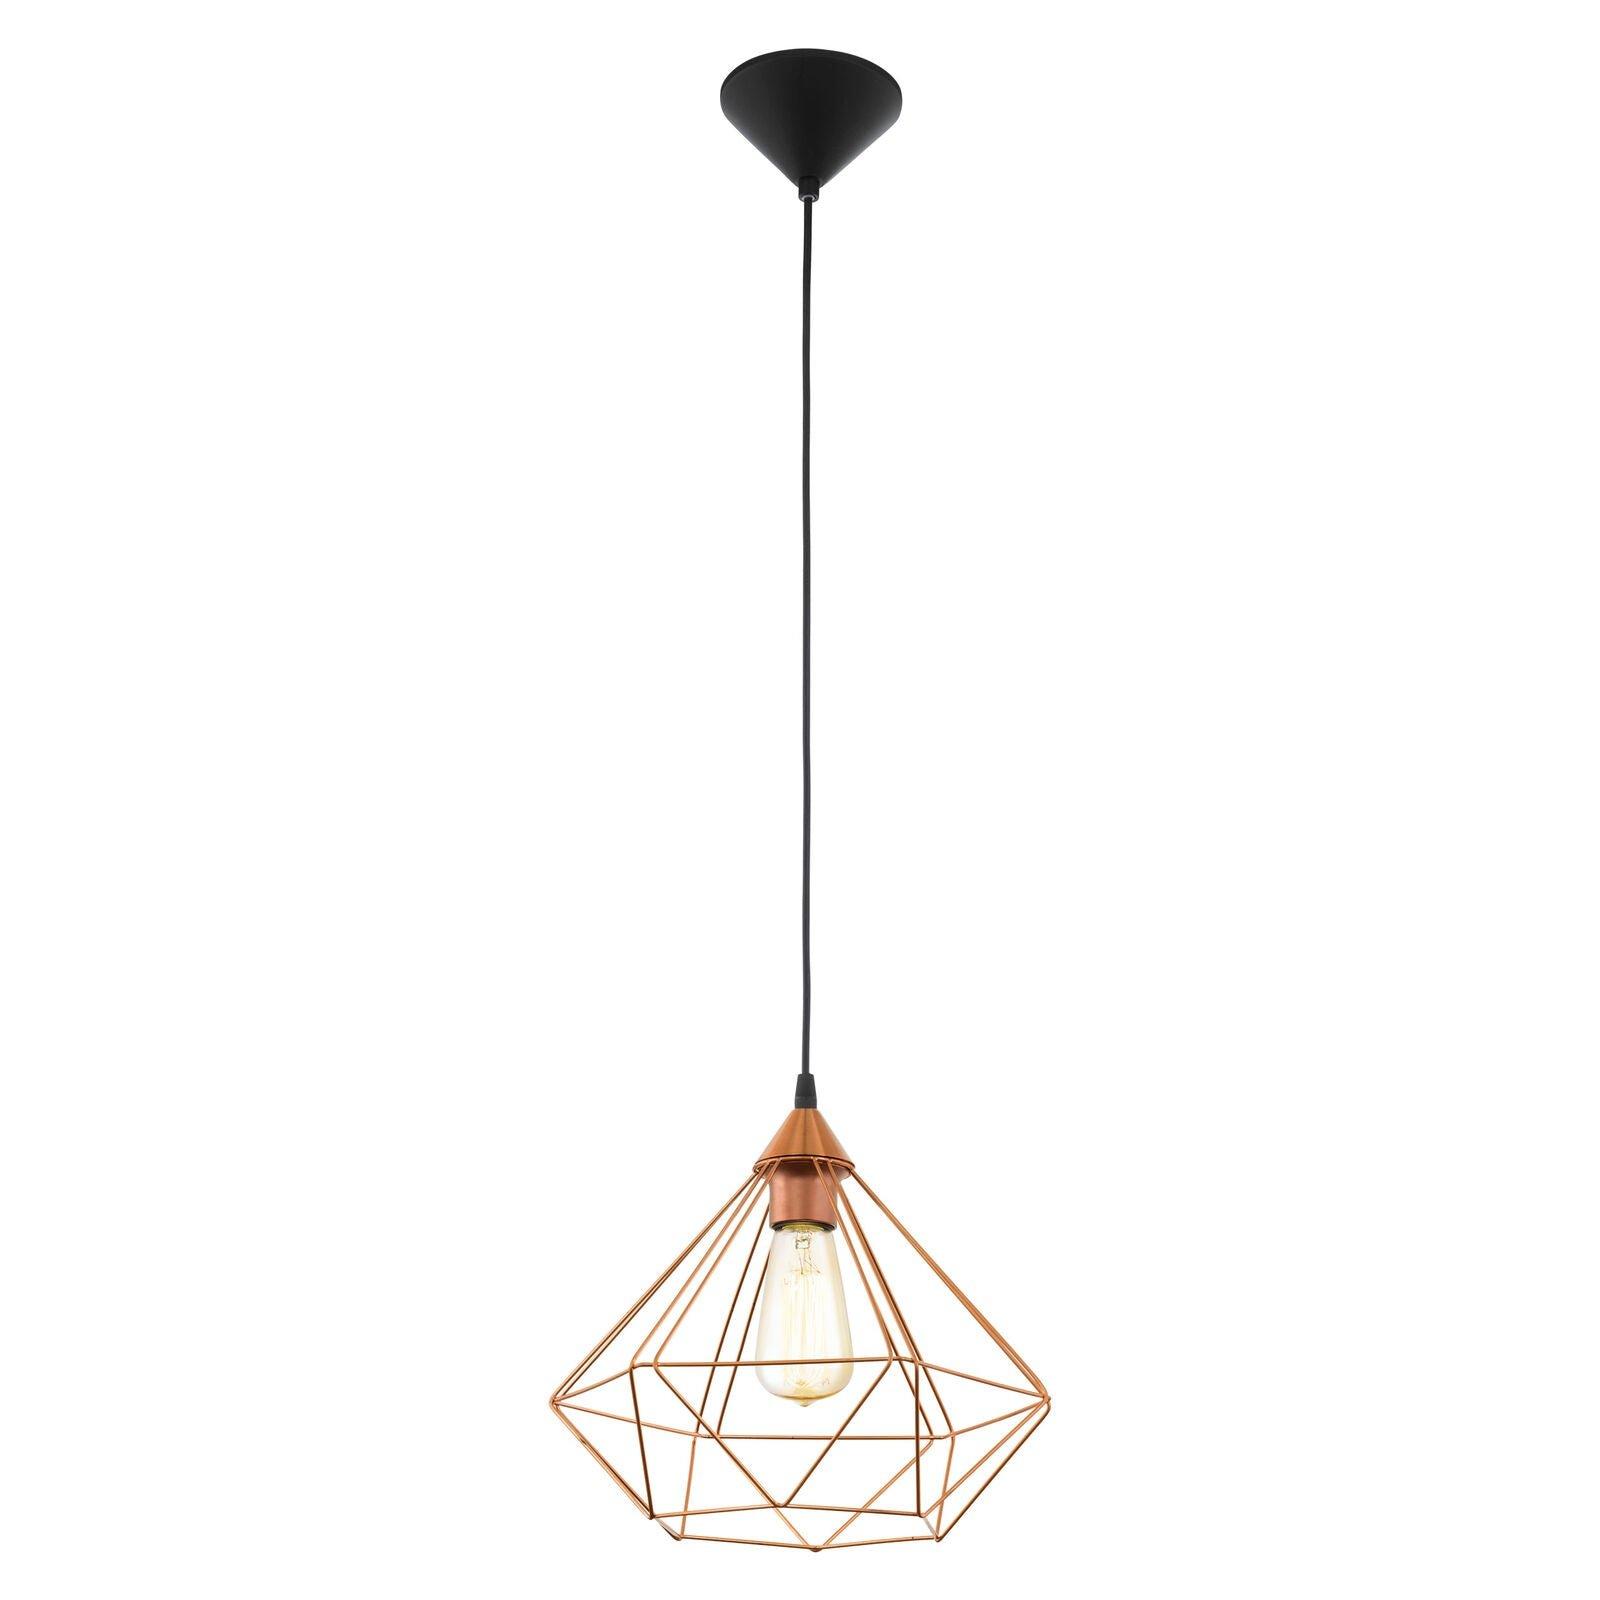 Hanging Ceiling Pendant Light Copper Wire Cage 1x E27 Hallway Feature Lamp